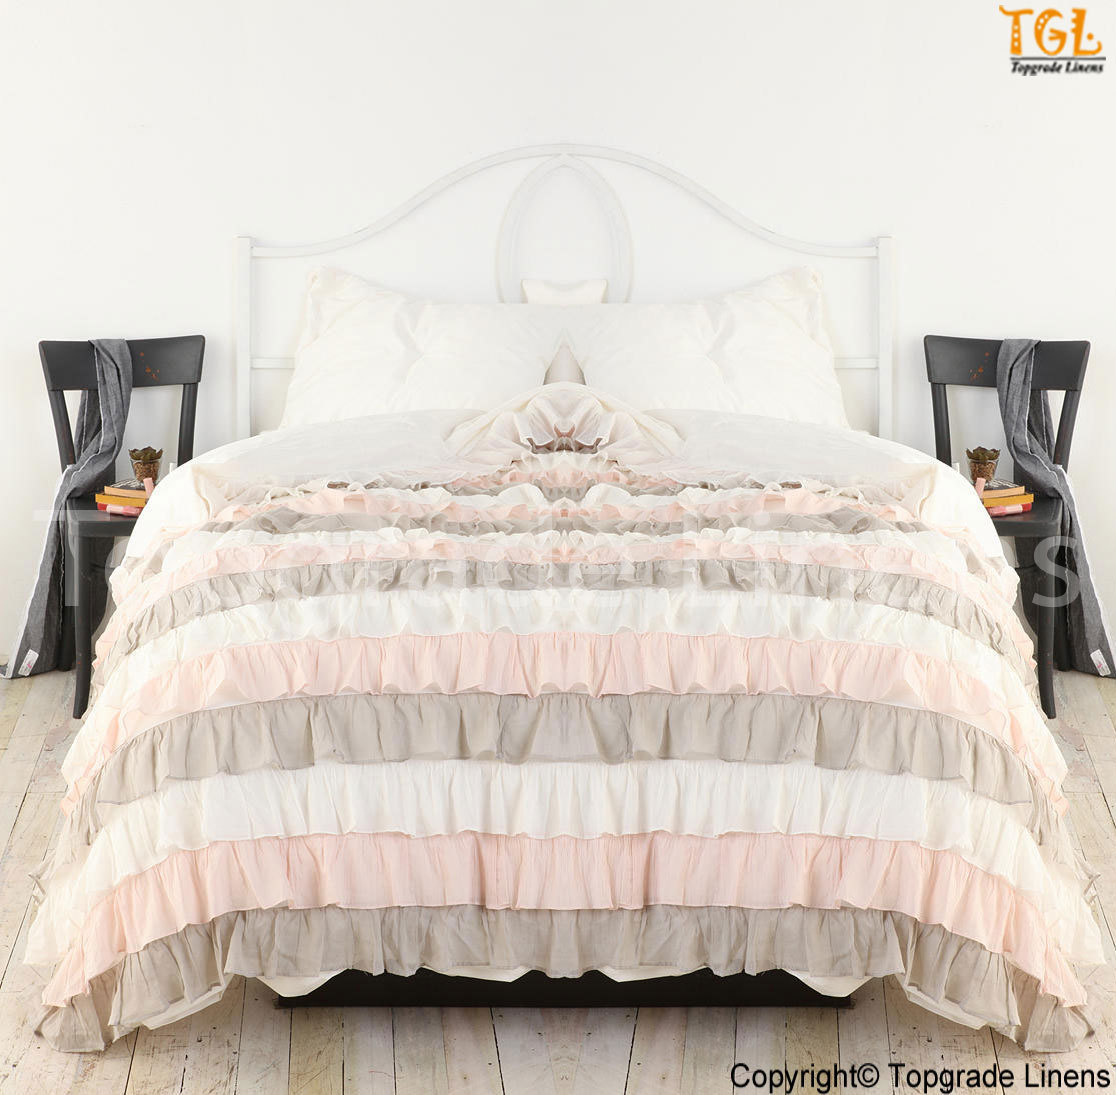 MULTI COLOR Waterfall Ruffle Duvet Cover Egyptian Cotton Choose Size & Color - $159.99